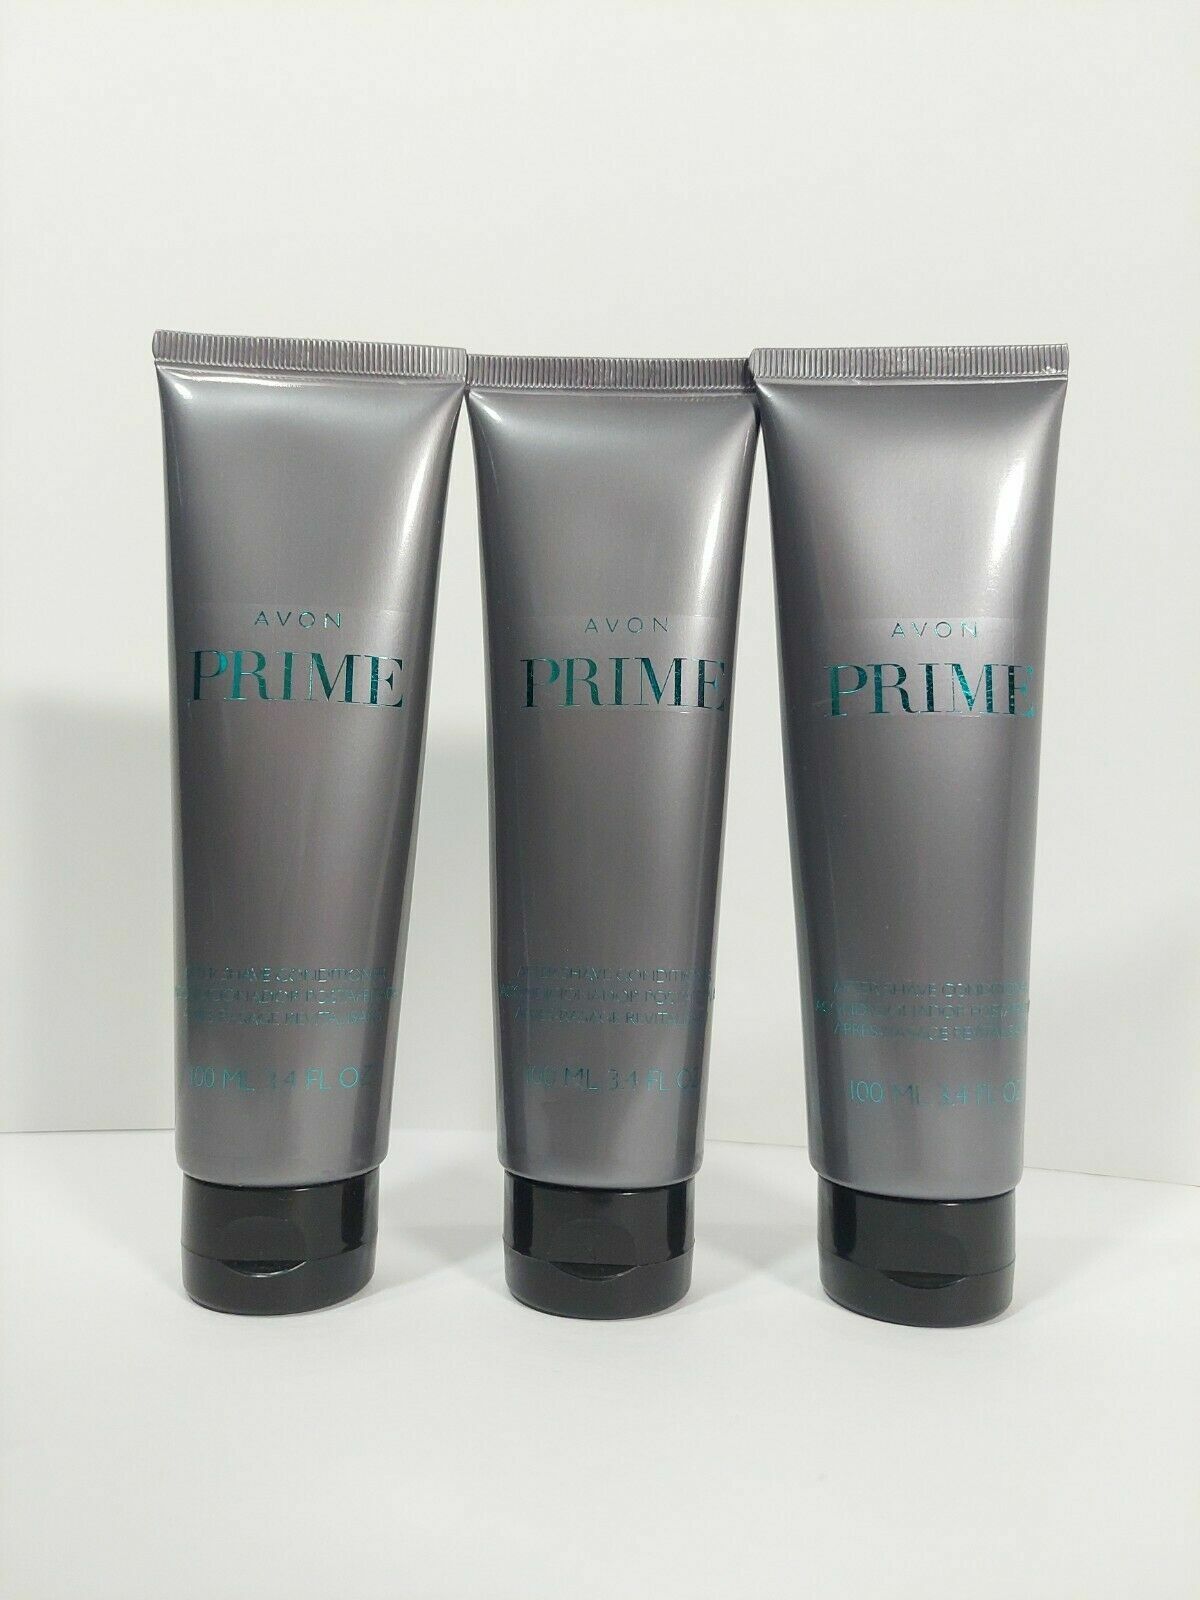 AVON PRIME After Shave Conditioner 100ml 3.4oz  LOT OF 3 New and Sealed Avon